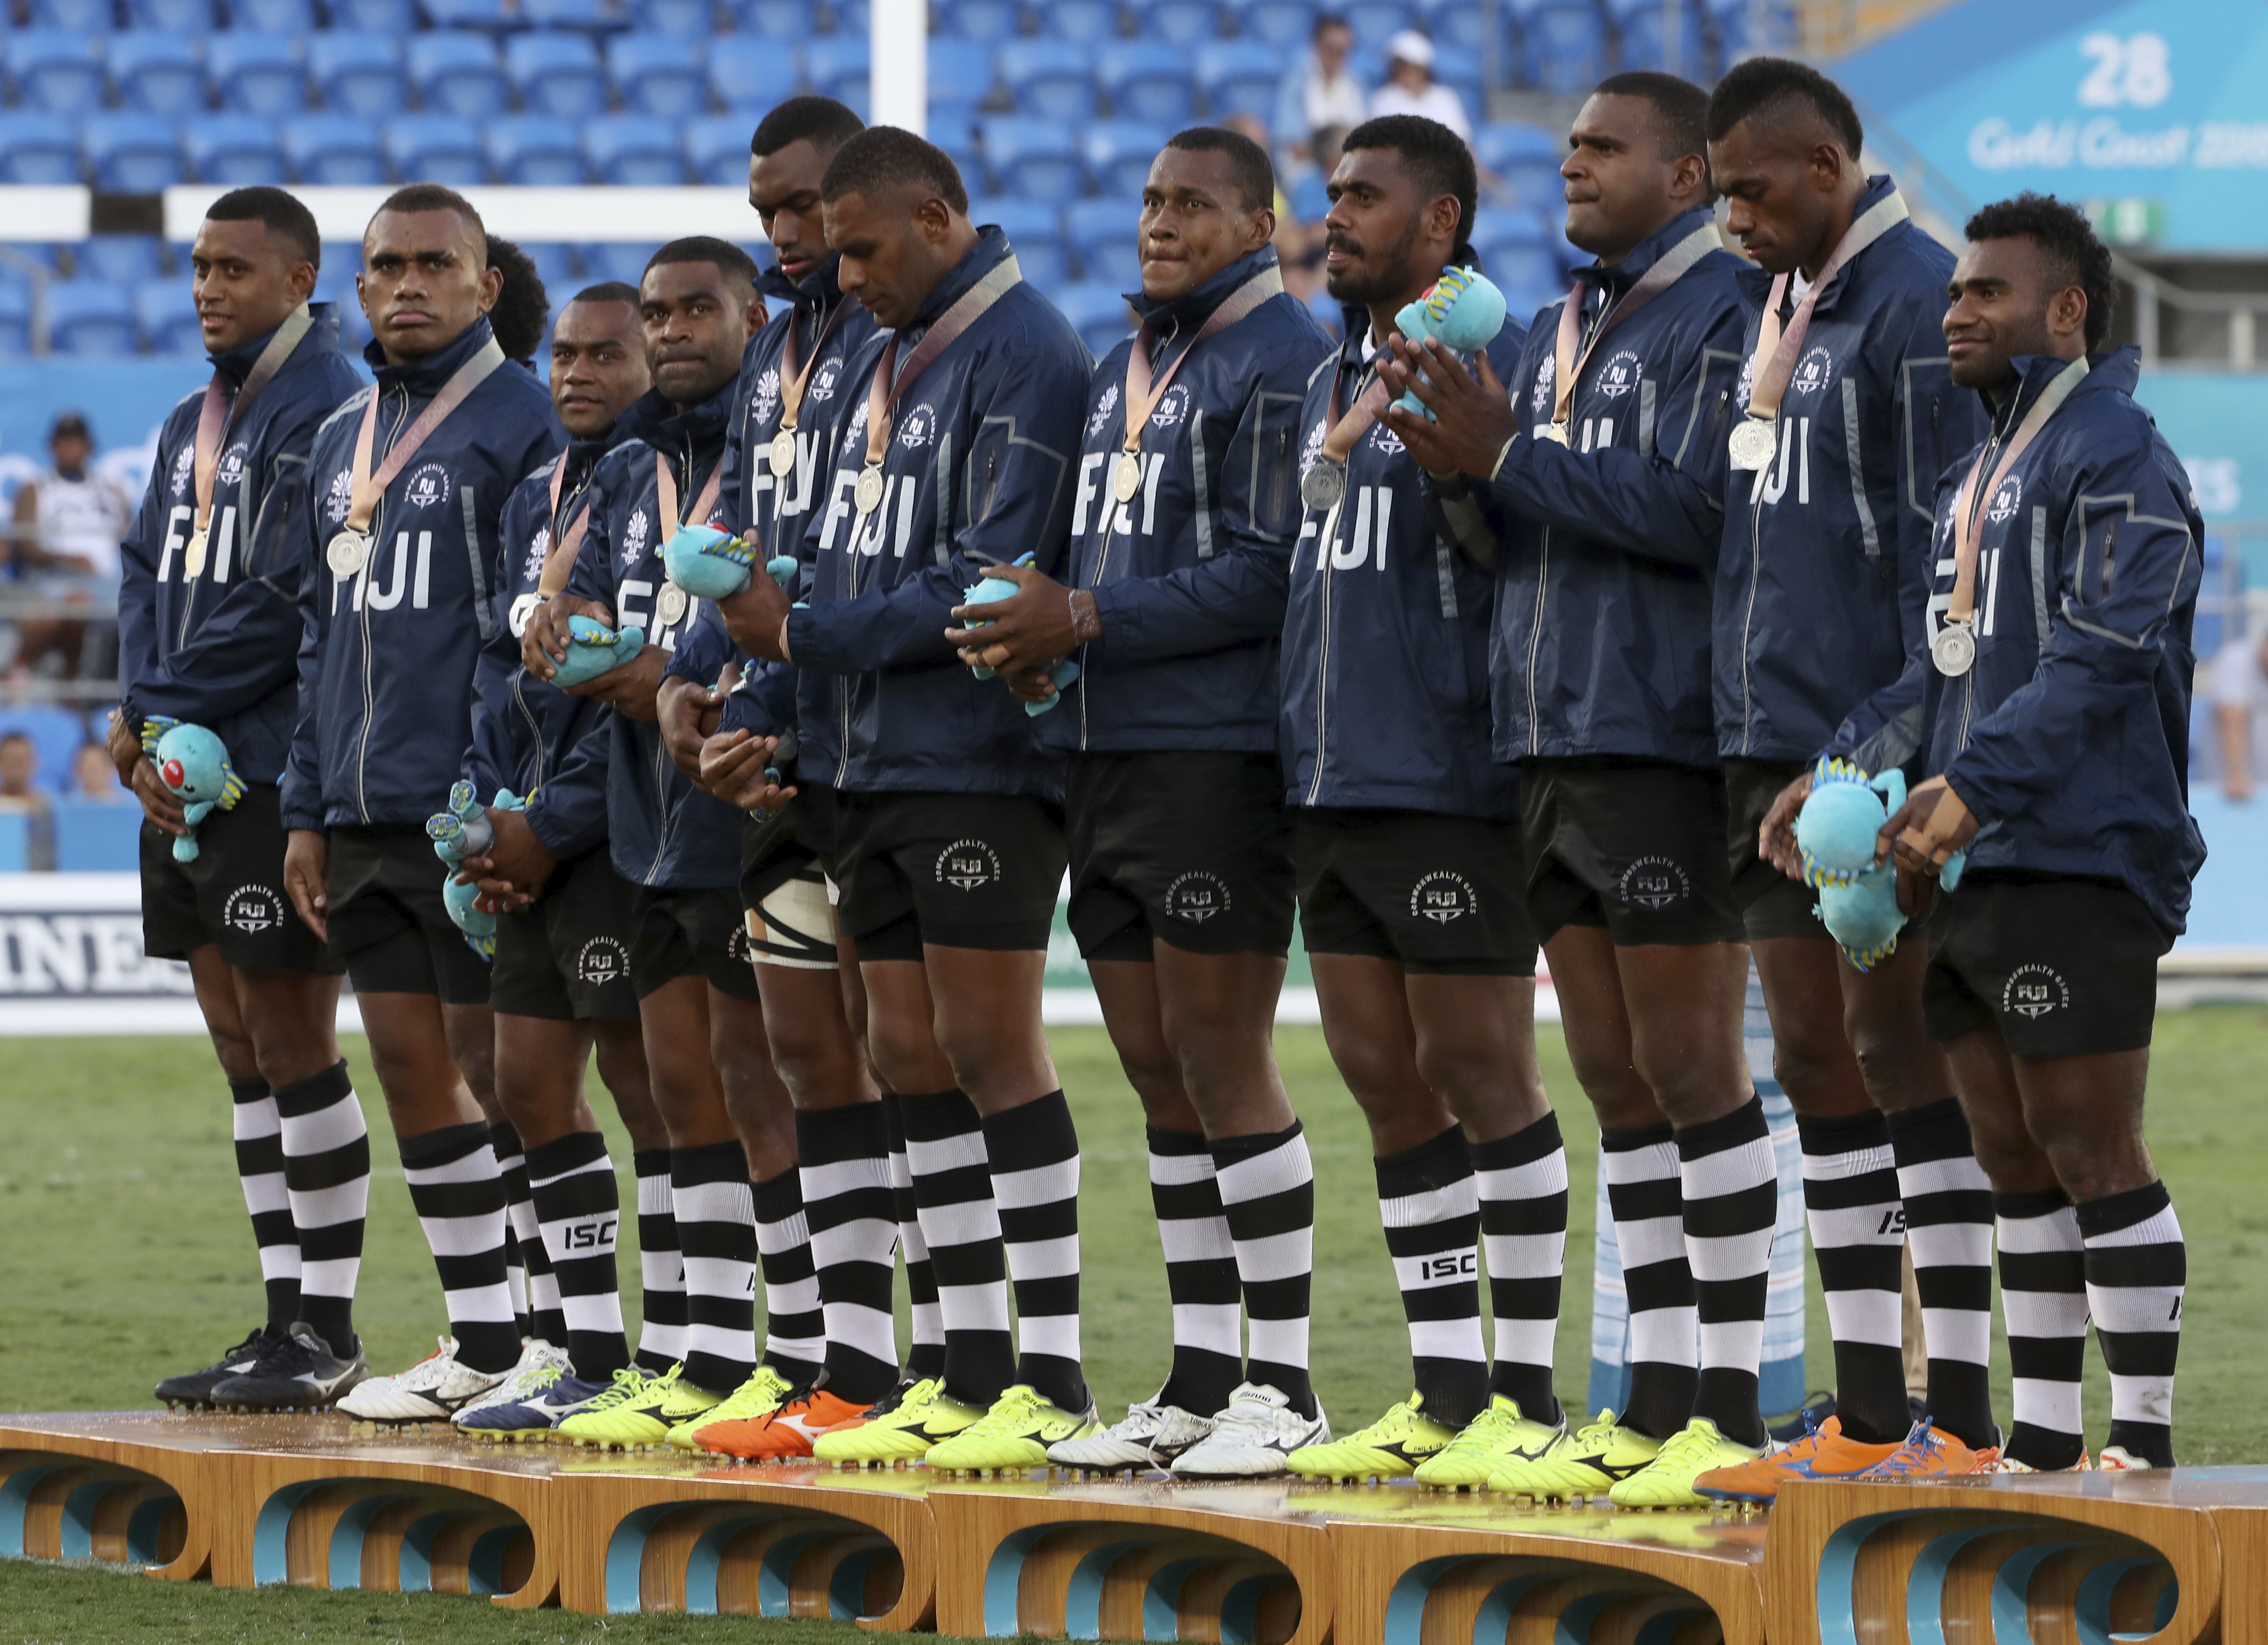 The Fiji men’s rugby sevens team on the podium after taking the silver medal at Robina Stadium. Photo: AP